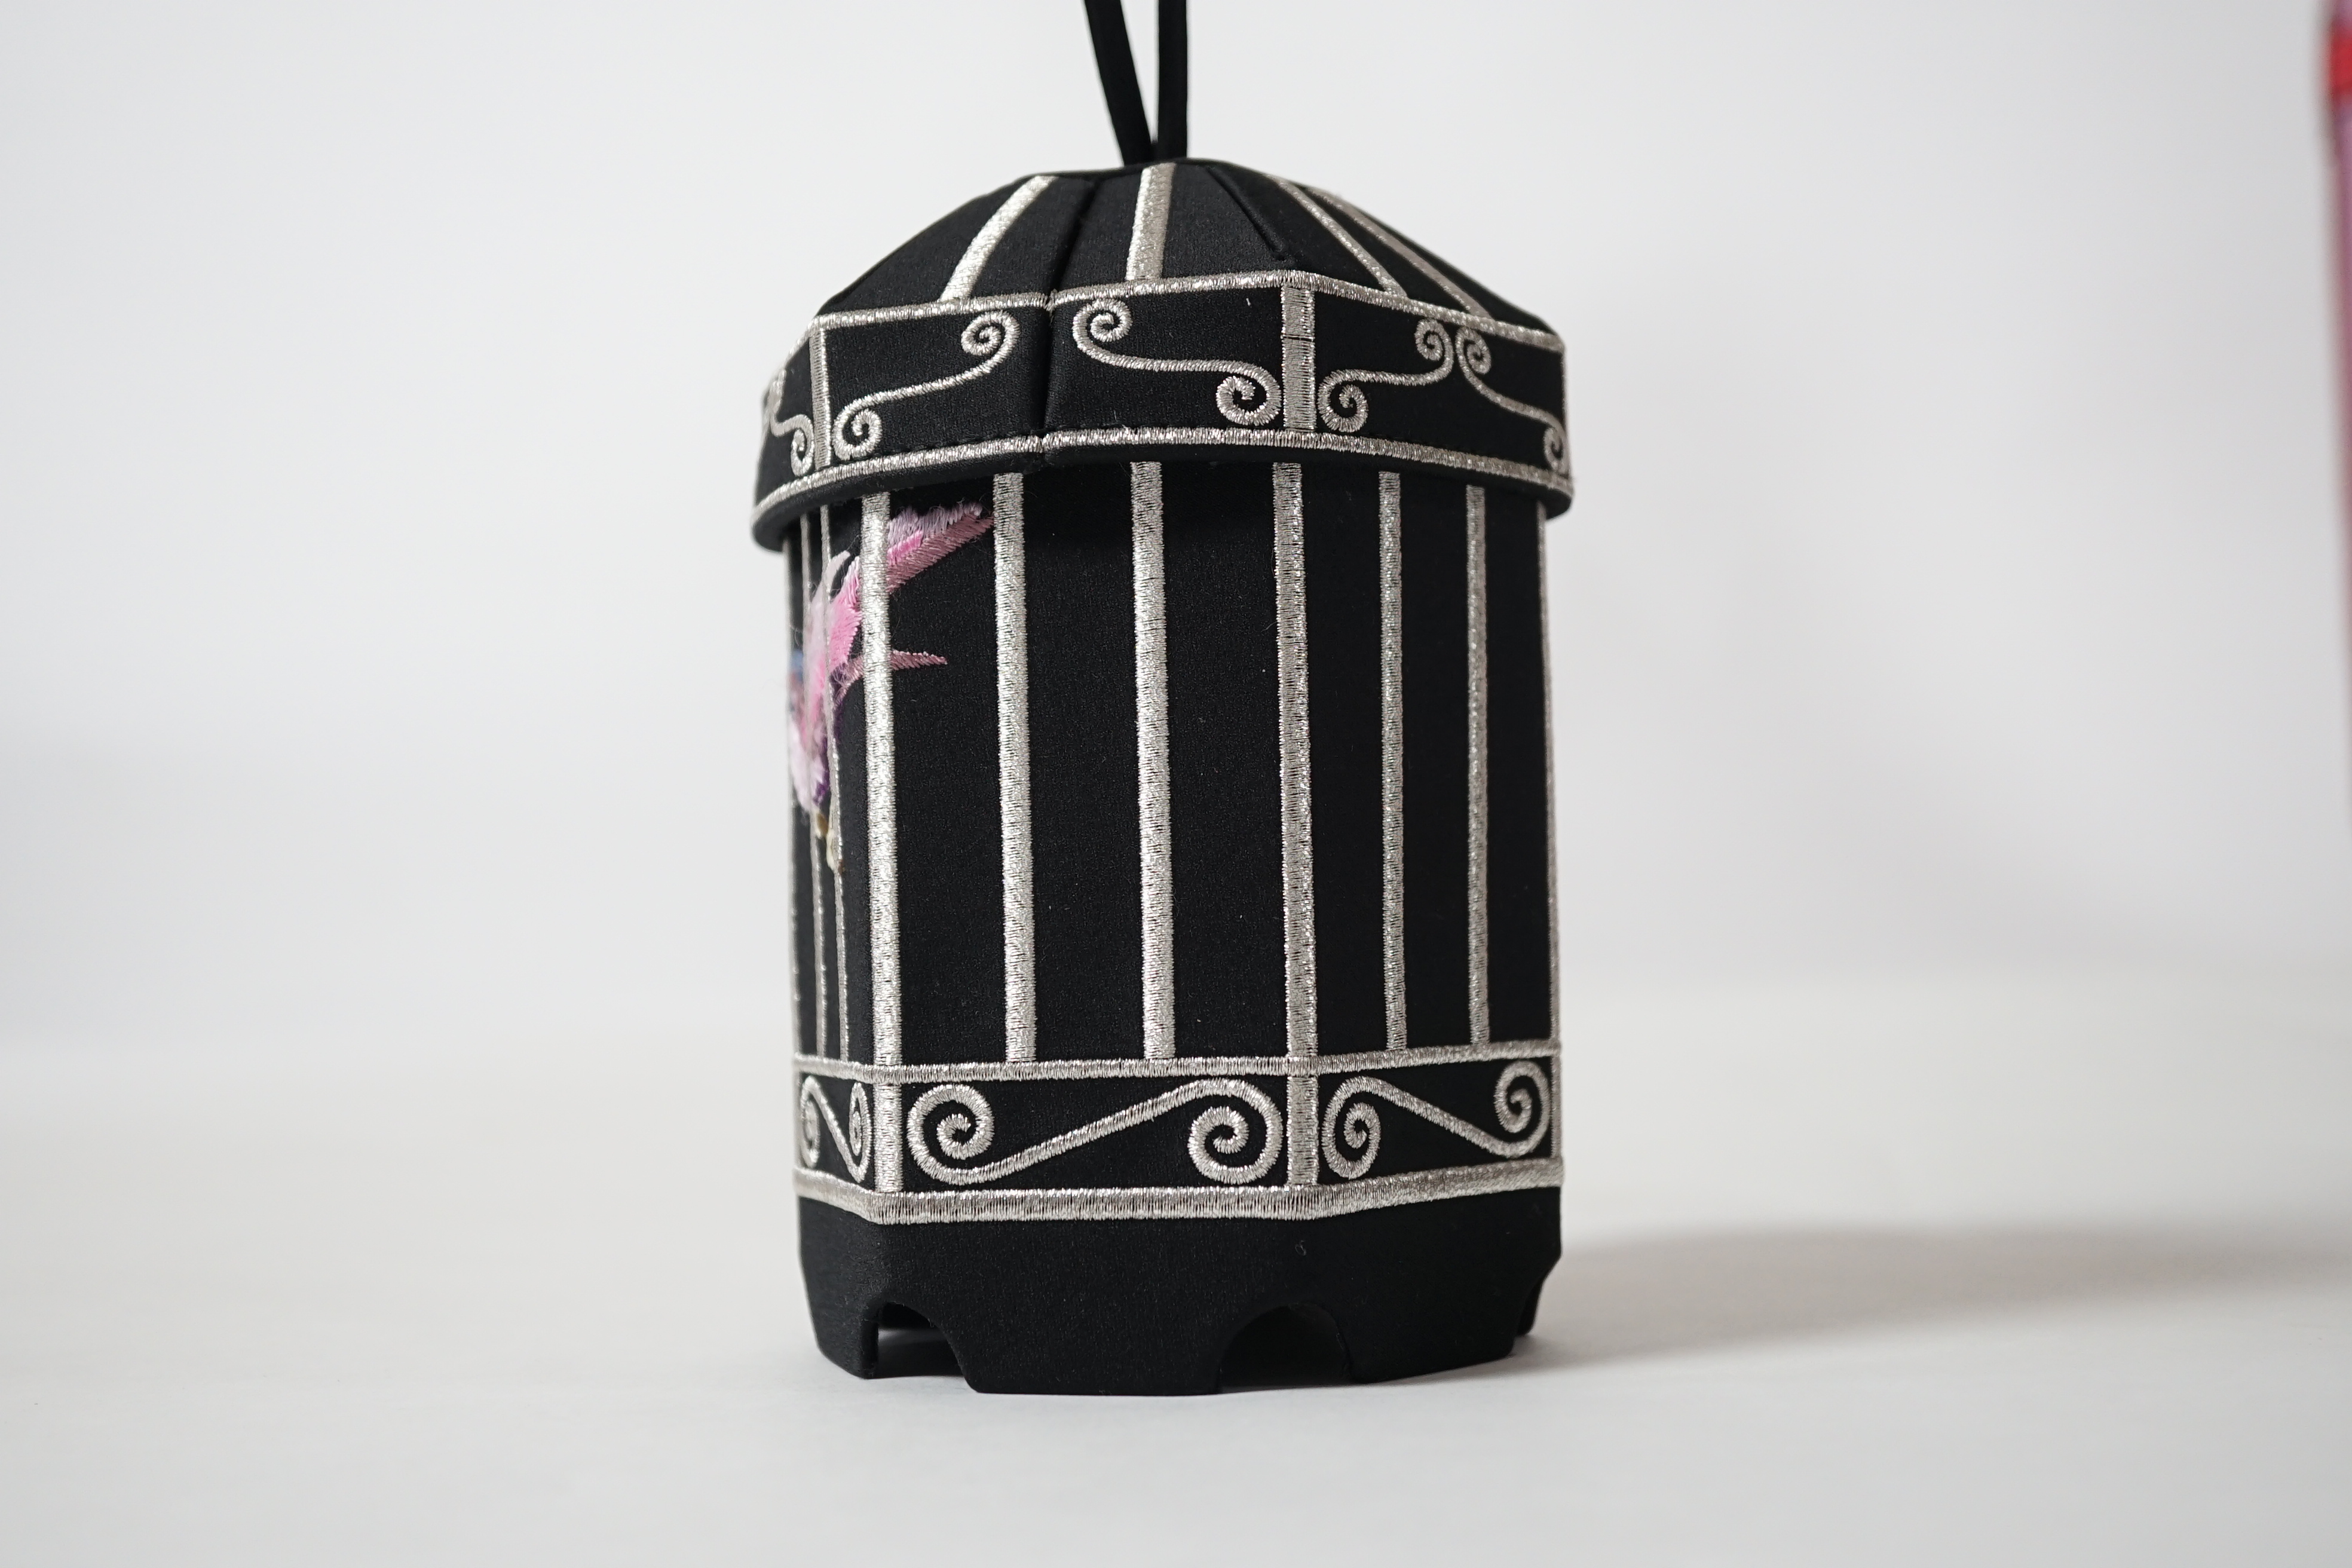 A vintage Lulu Guinness 'Birdcage' evening bag, limited edition of 500, height 15cm, height to strap 30cm, depth 9cm